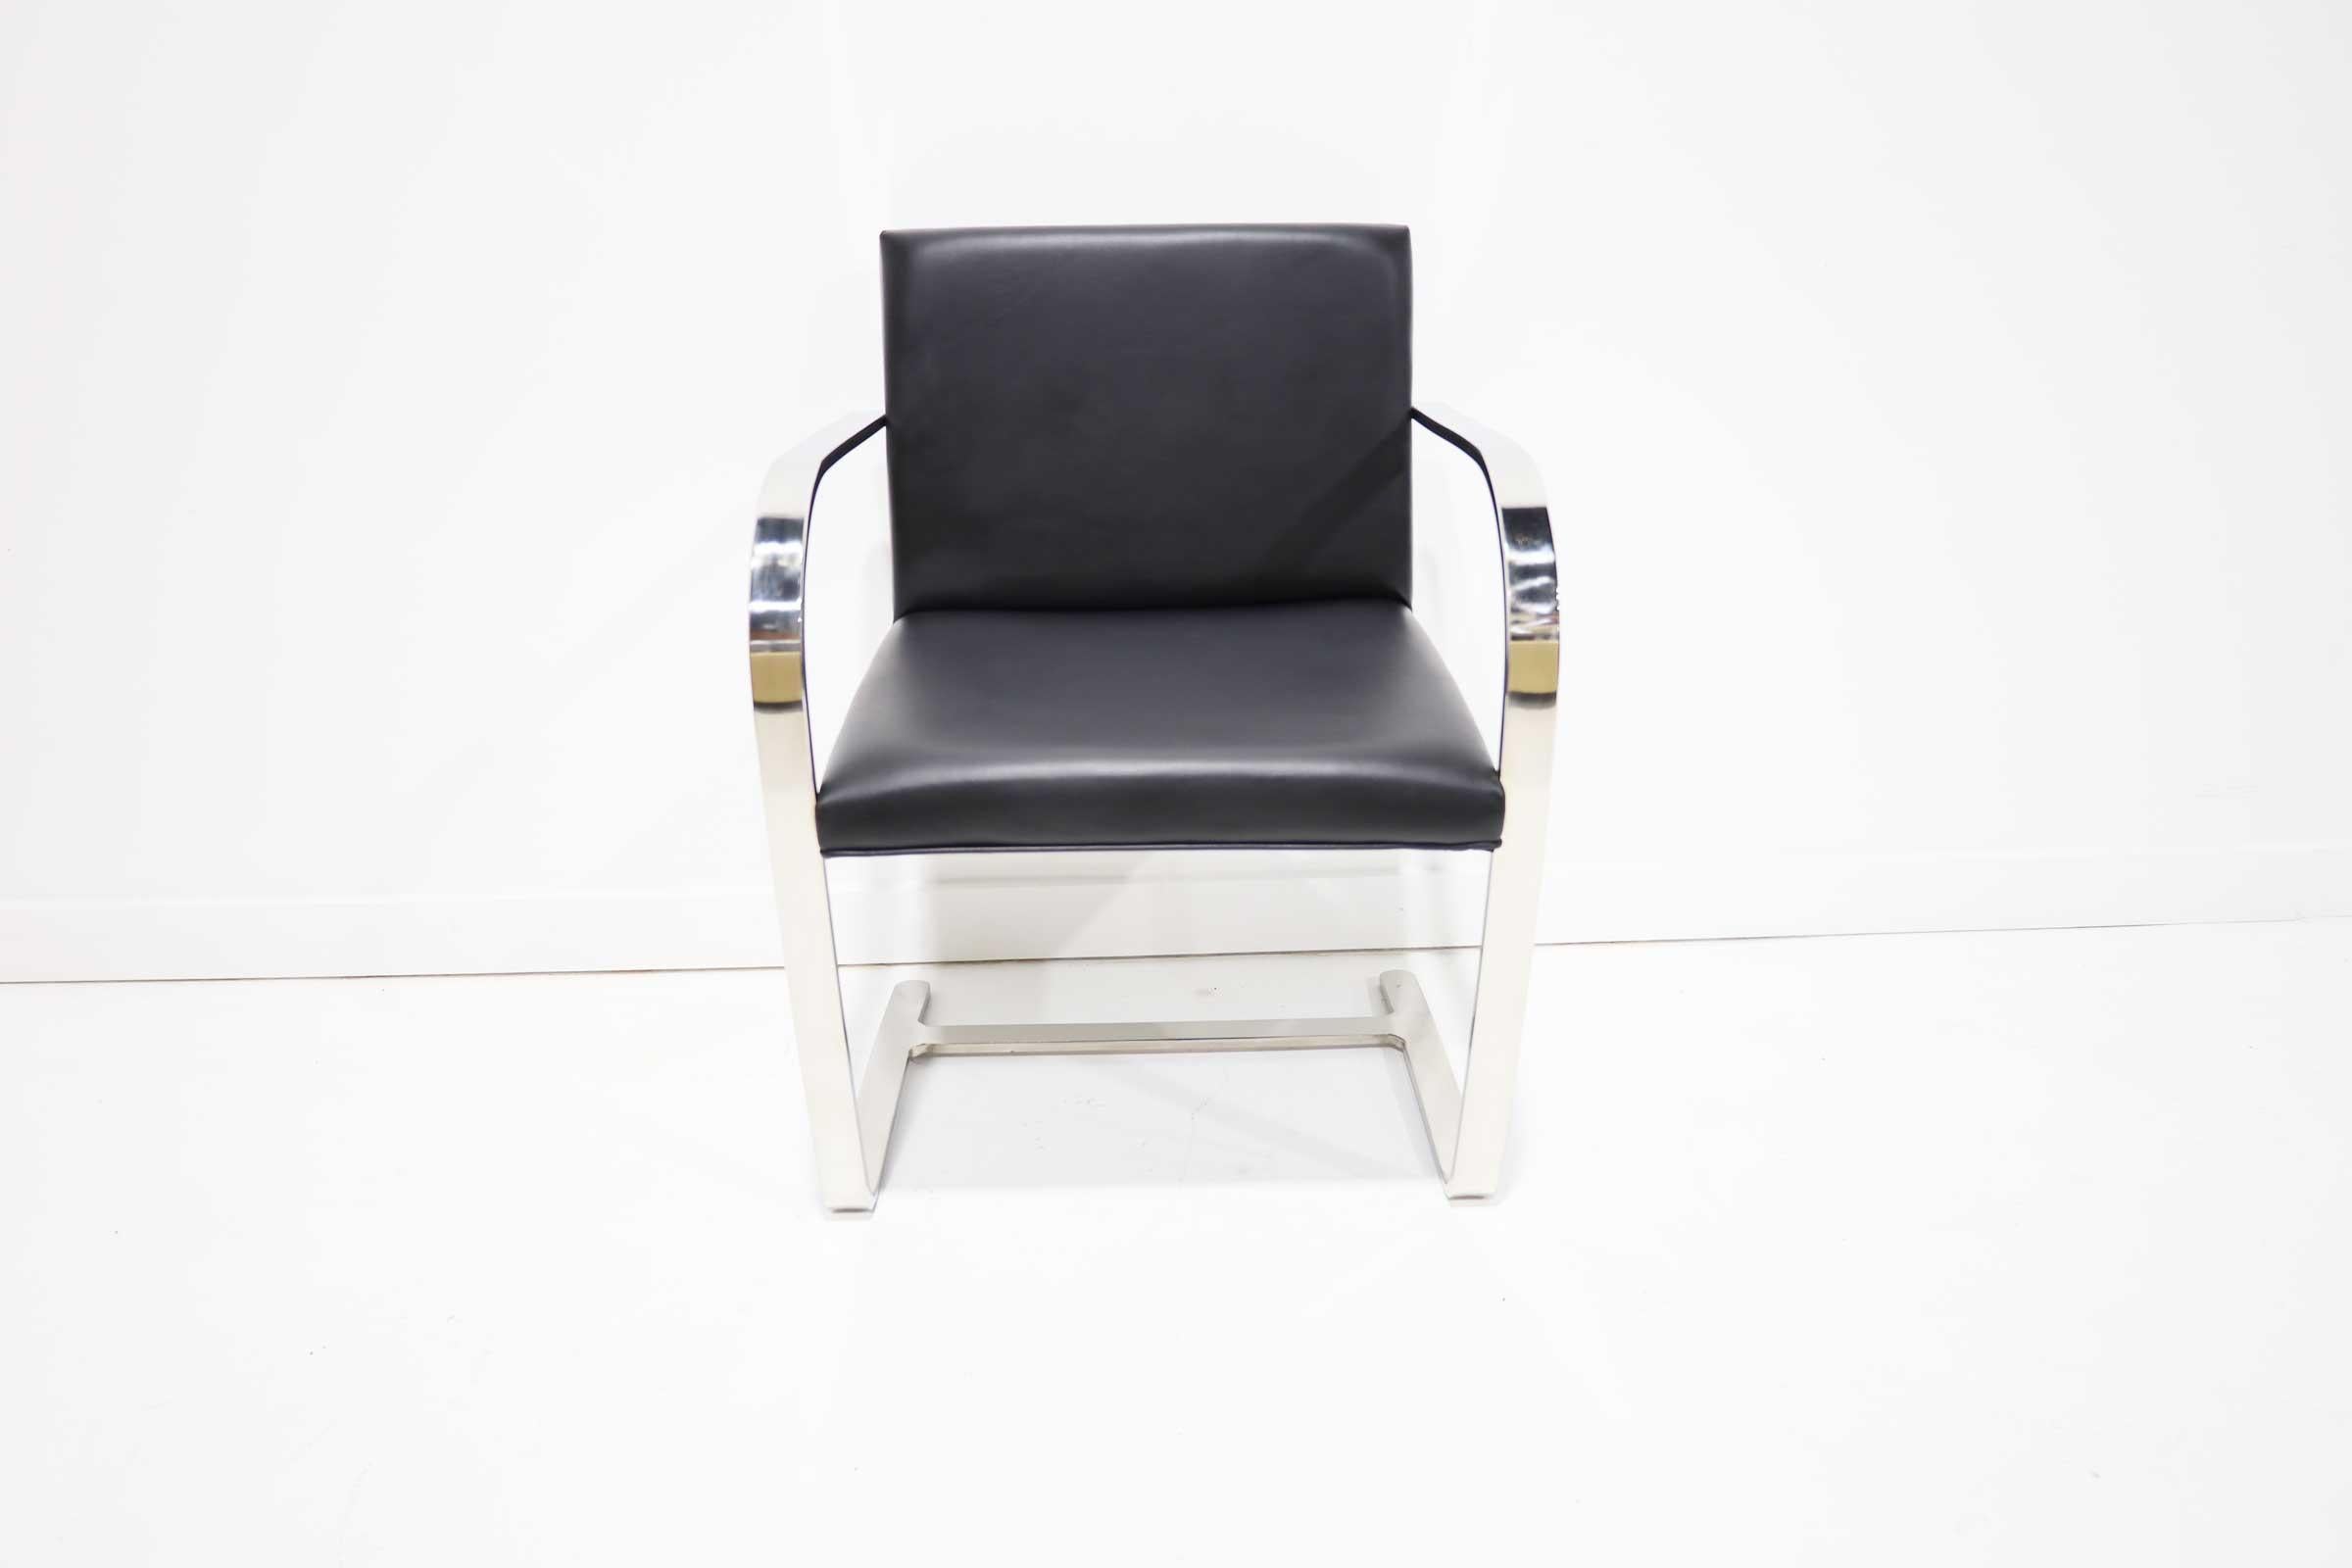 The Brno chairs was designed by Ludwig Mies van der Rohe for Knoll. It is an iconic design that works well in many environments. This set has a polished stainless steel frame and is upholstered in a faux leather. Chairs are very clean and